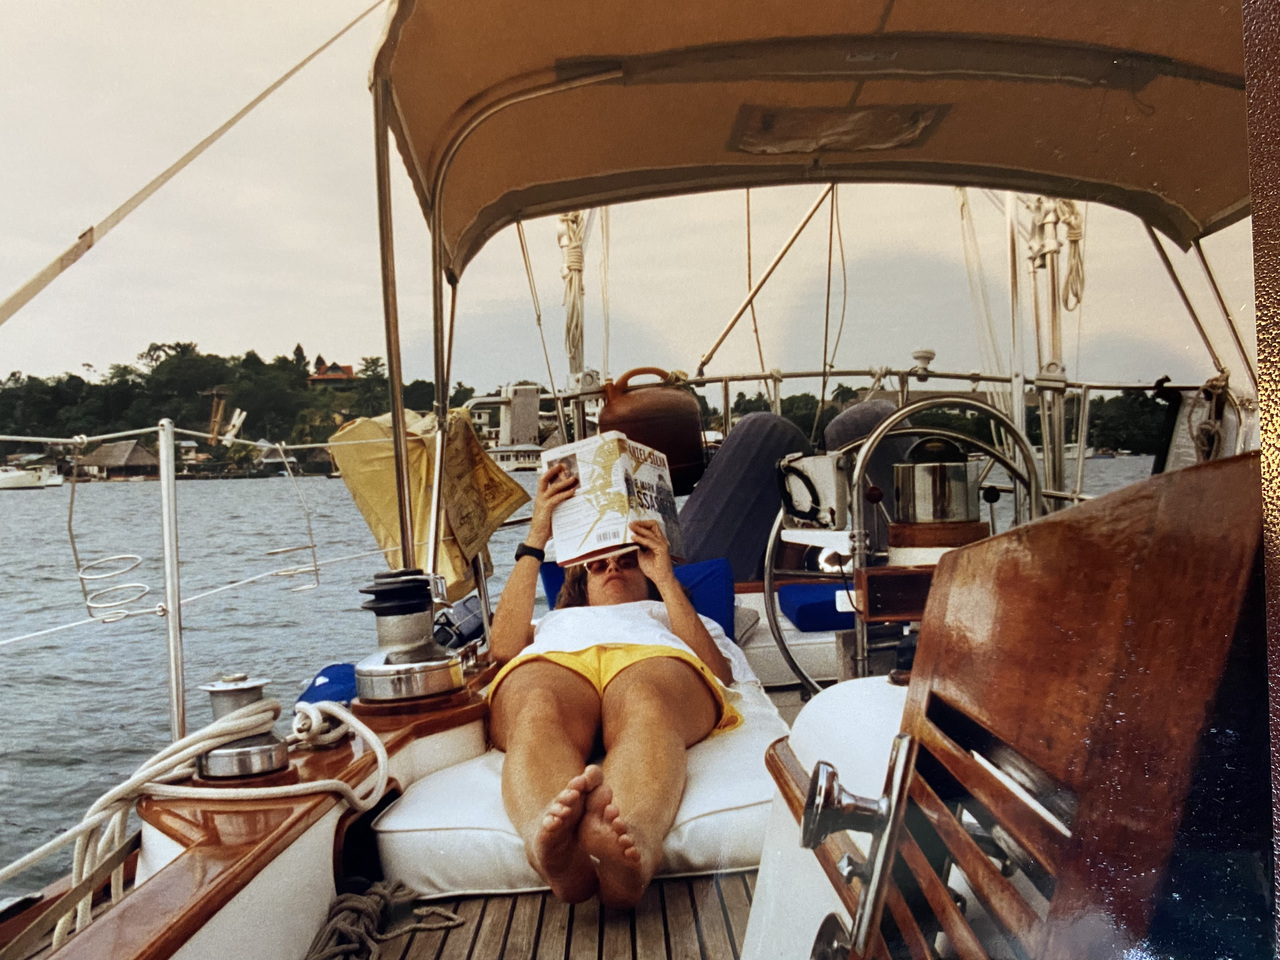 Susan Cole lying on a sailboat and reading.